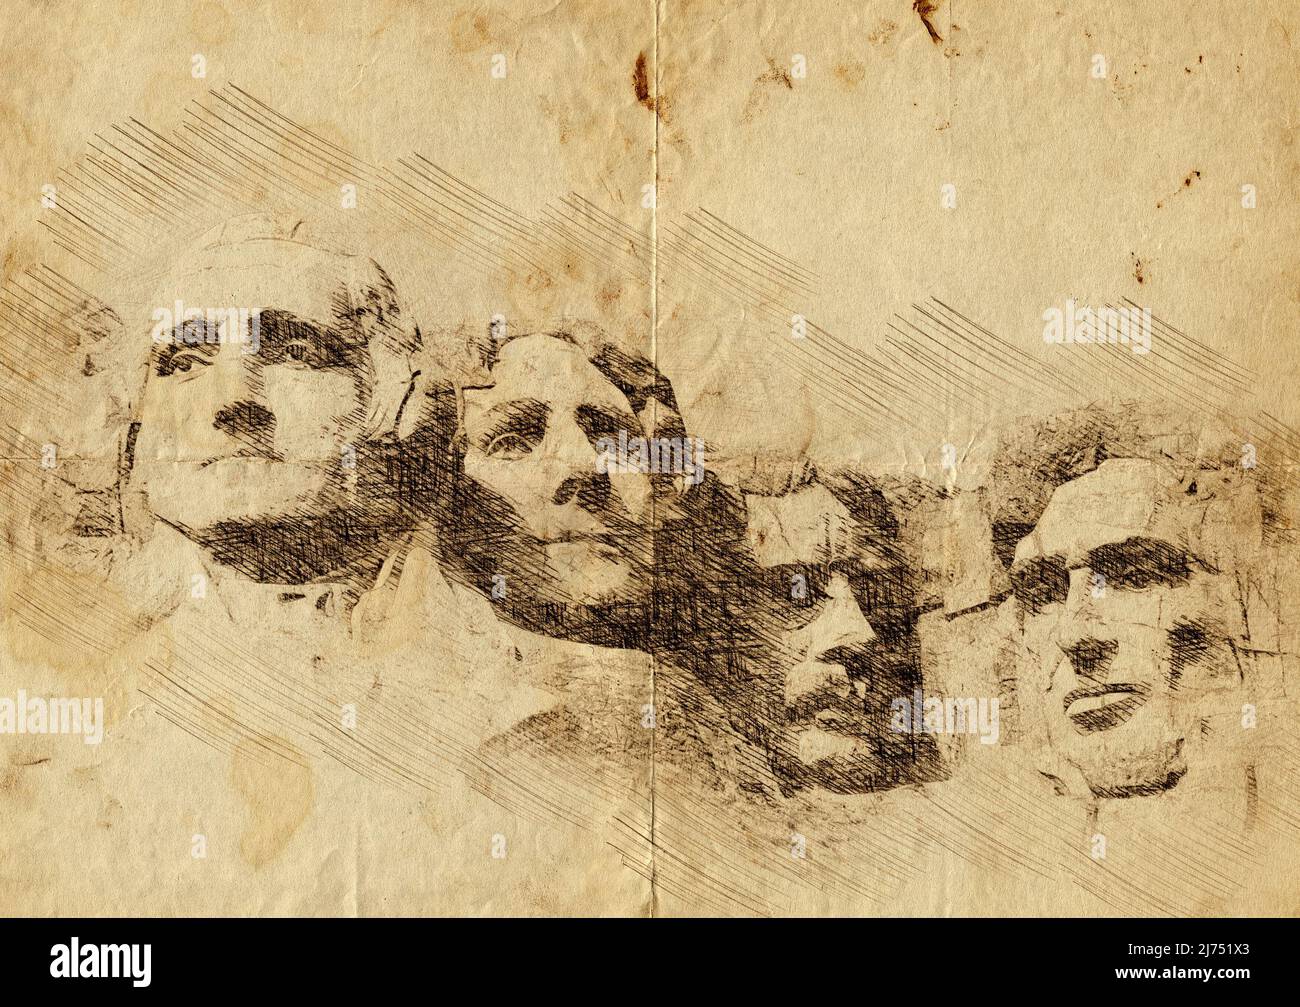 538 Mount Rushmore Illustration Images Stock Photos  Vectors   Shutterstock